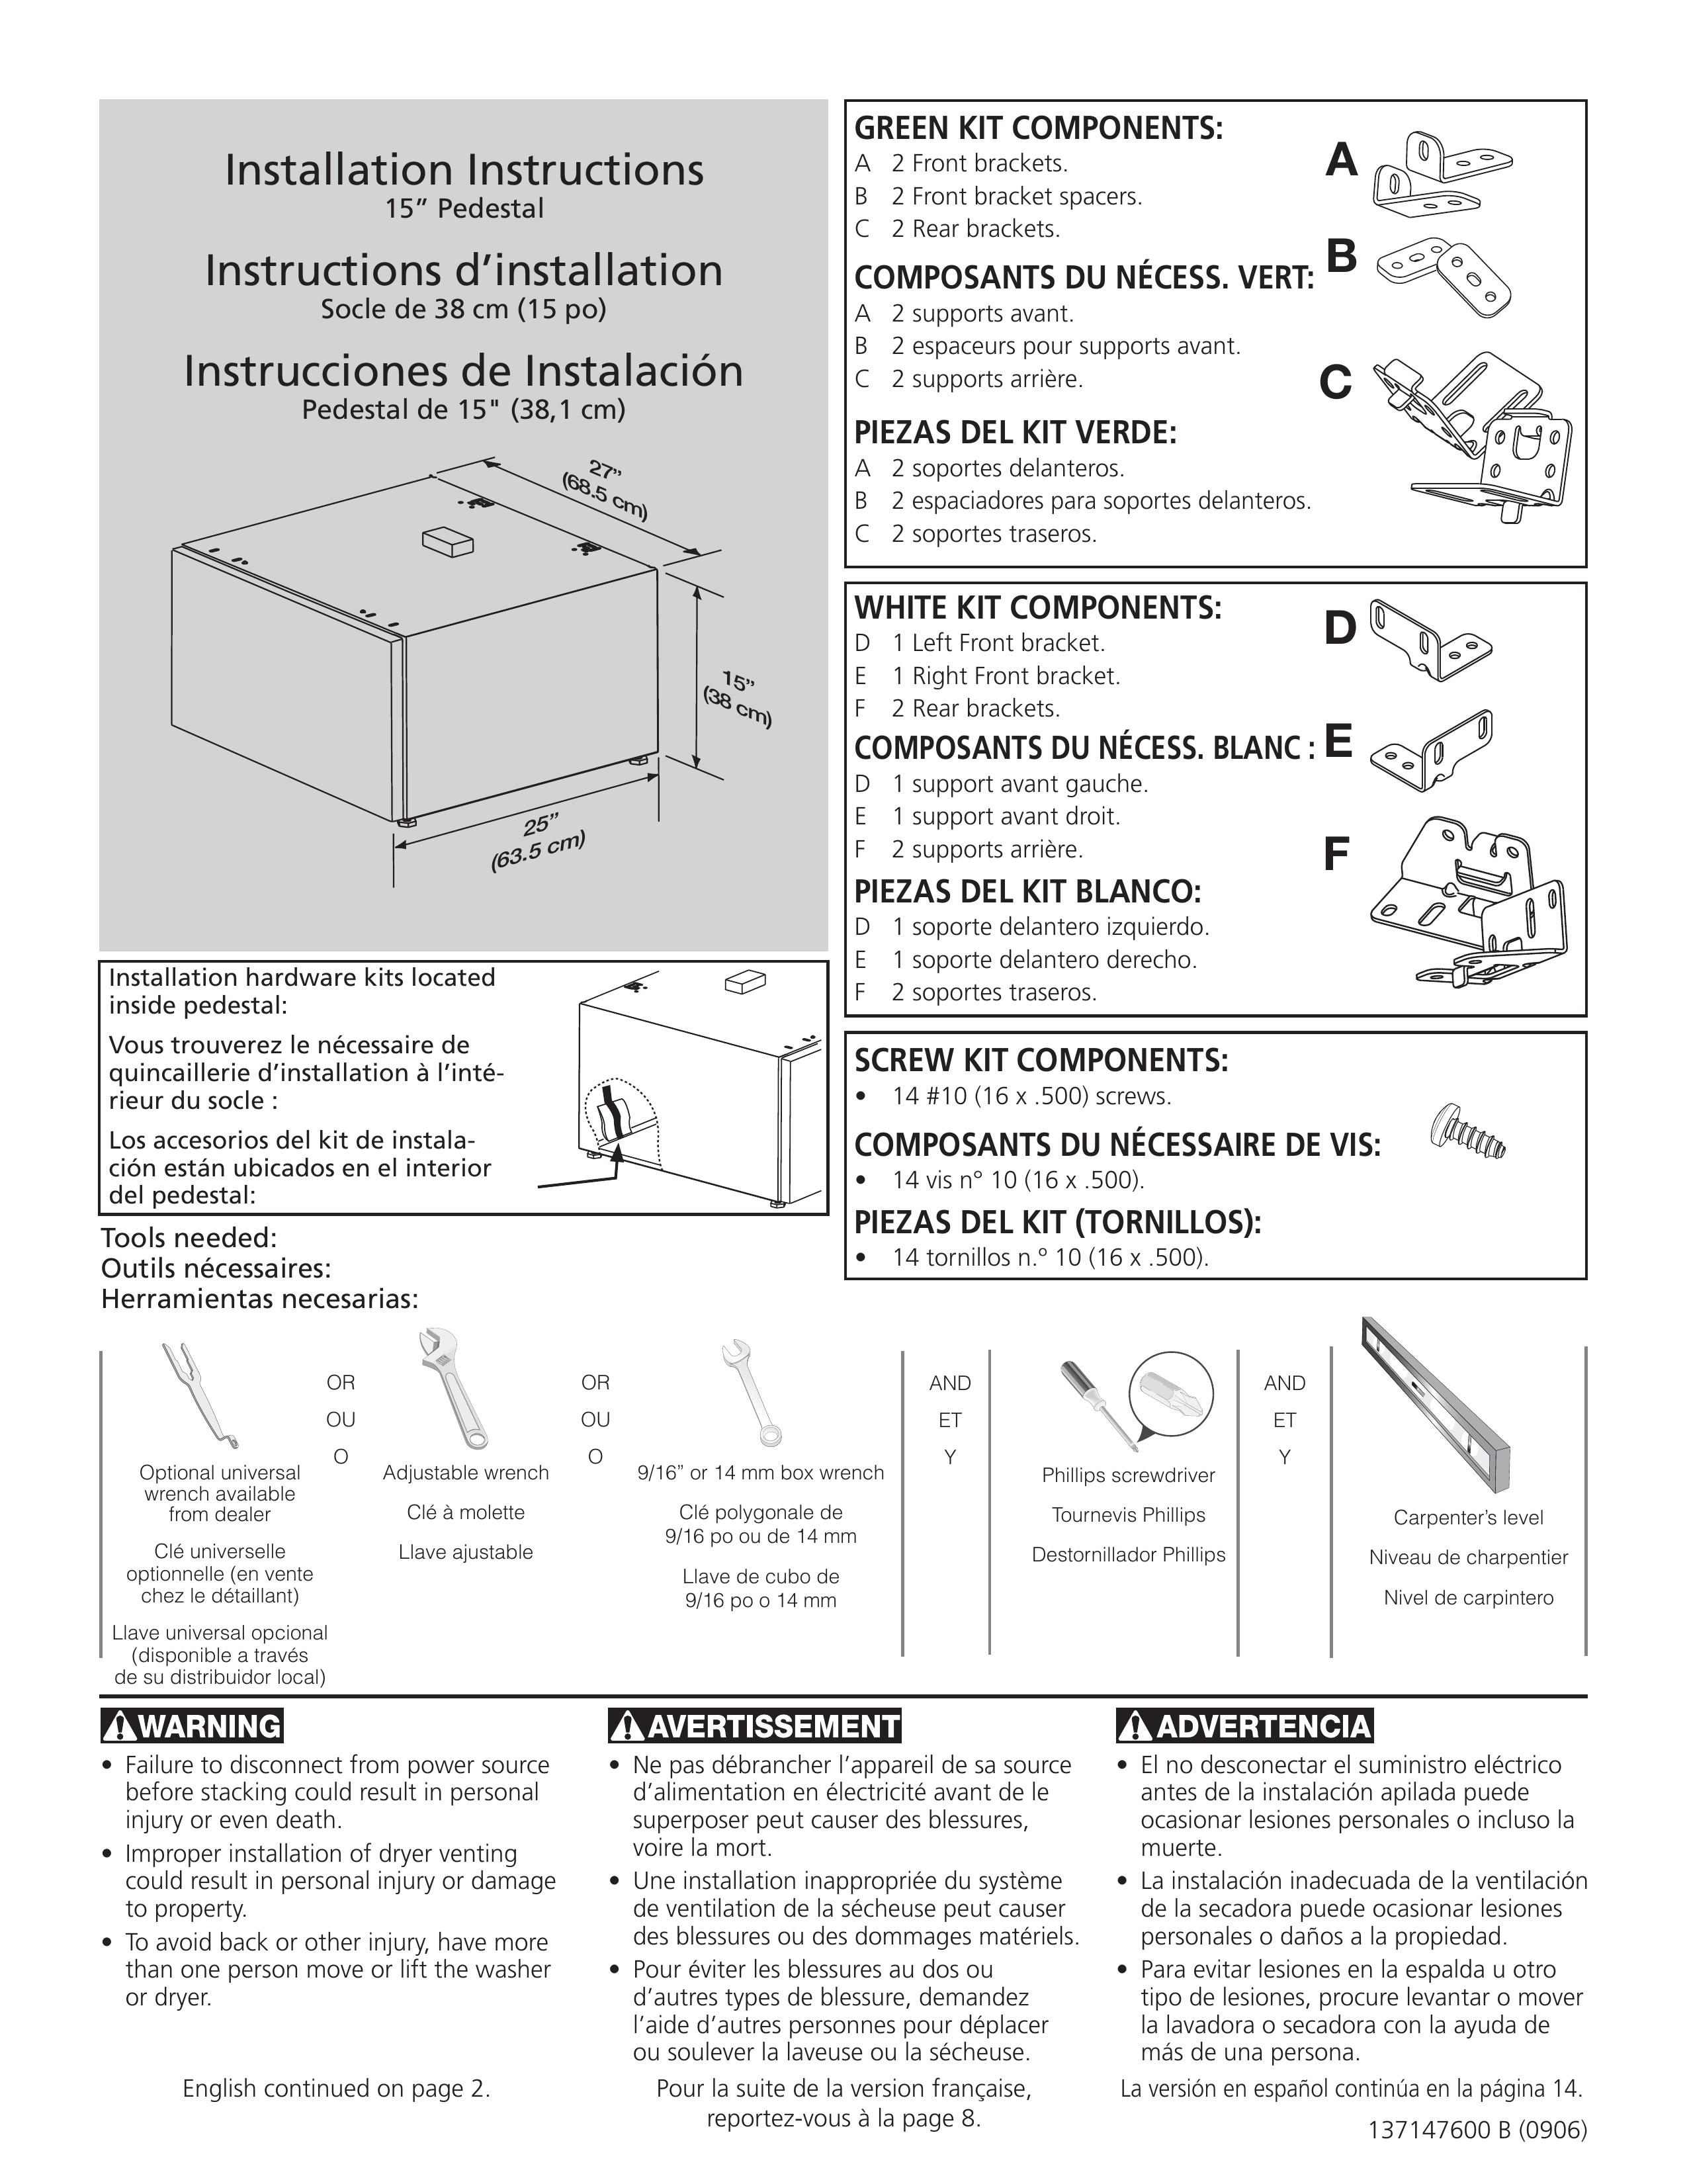 Frigidaire 137147600 B (0906) Washer Accessories User Manual